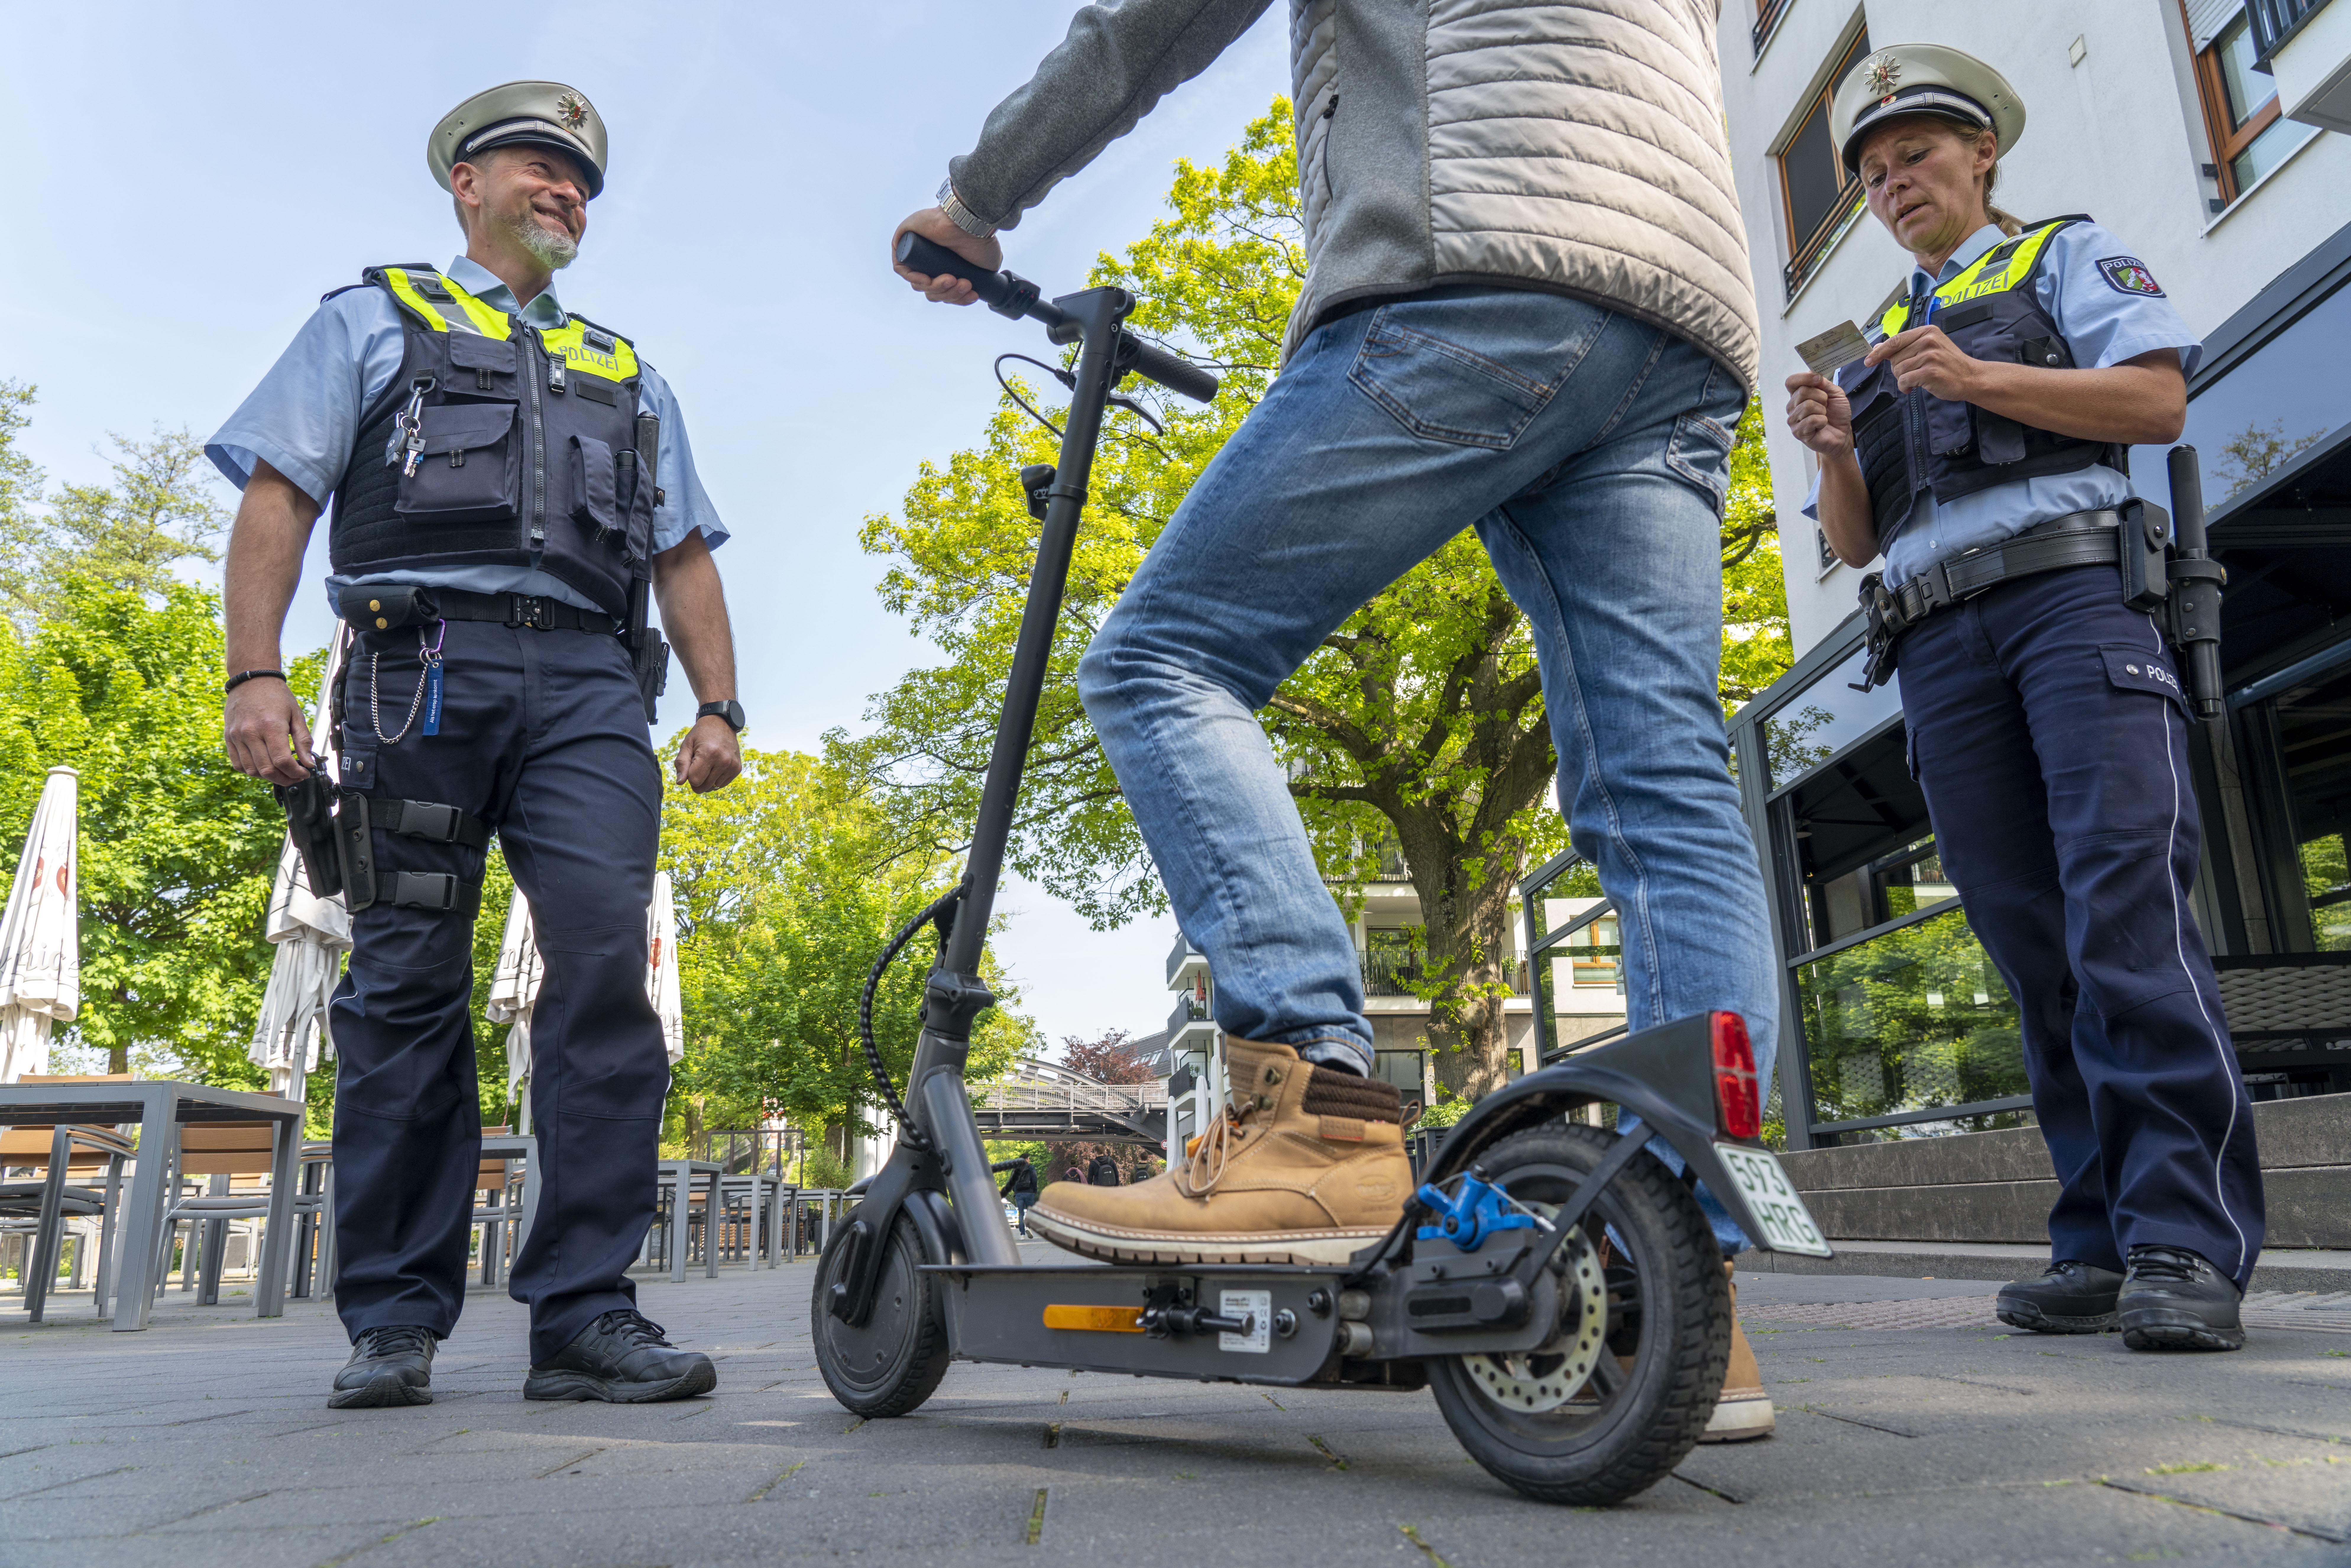 Using e-scooters - but the right way